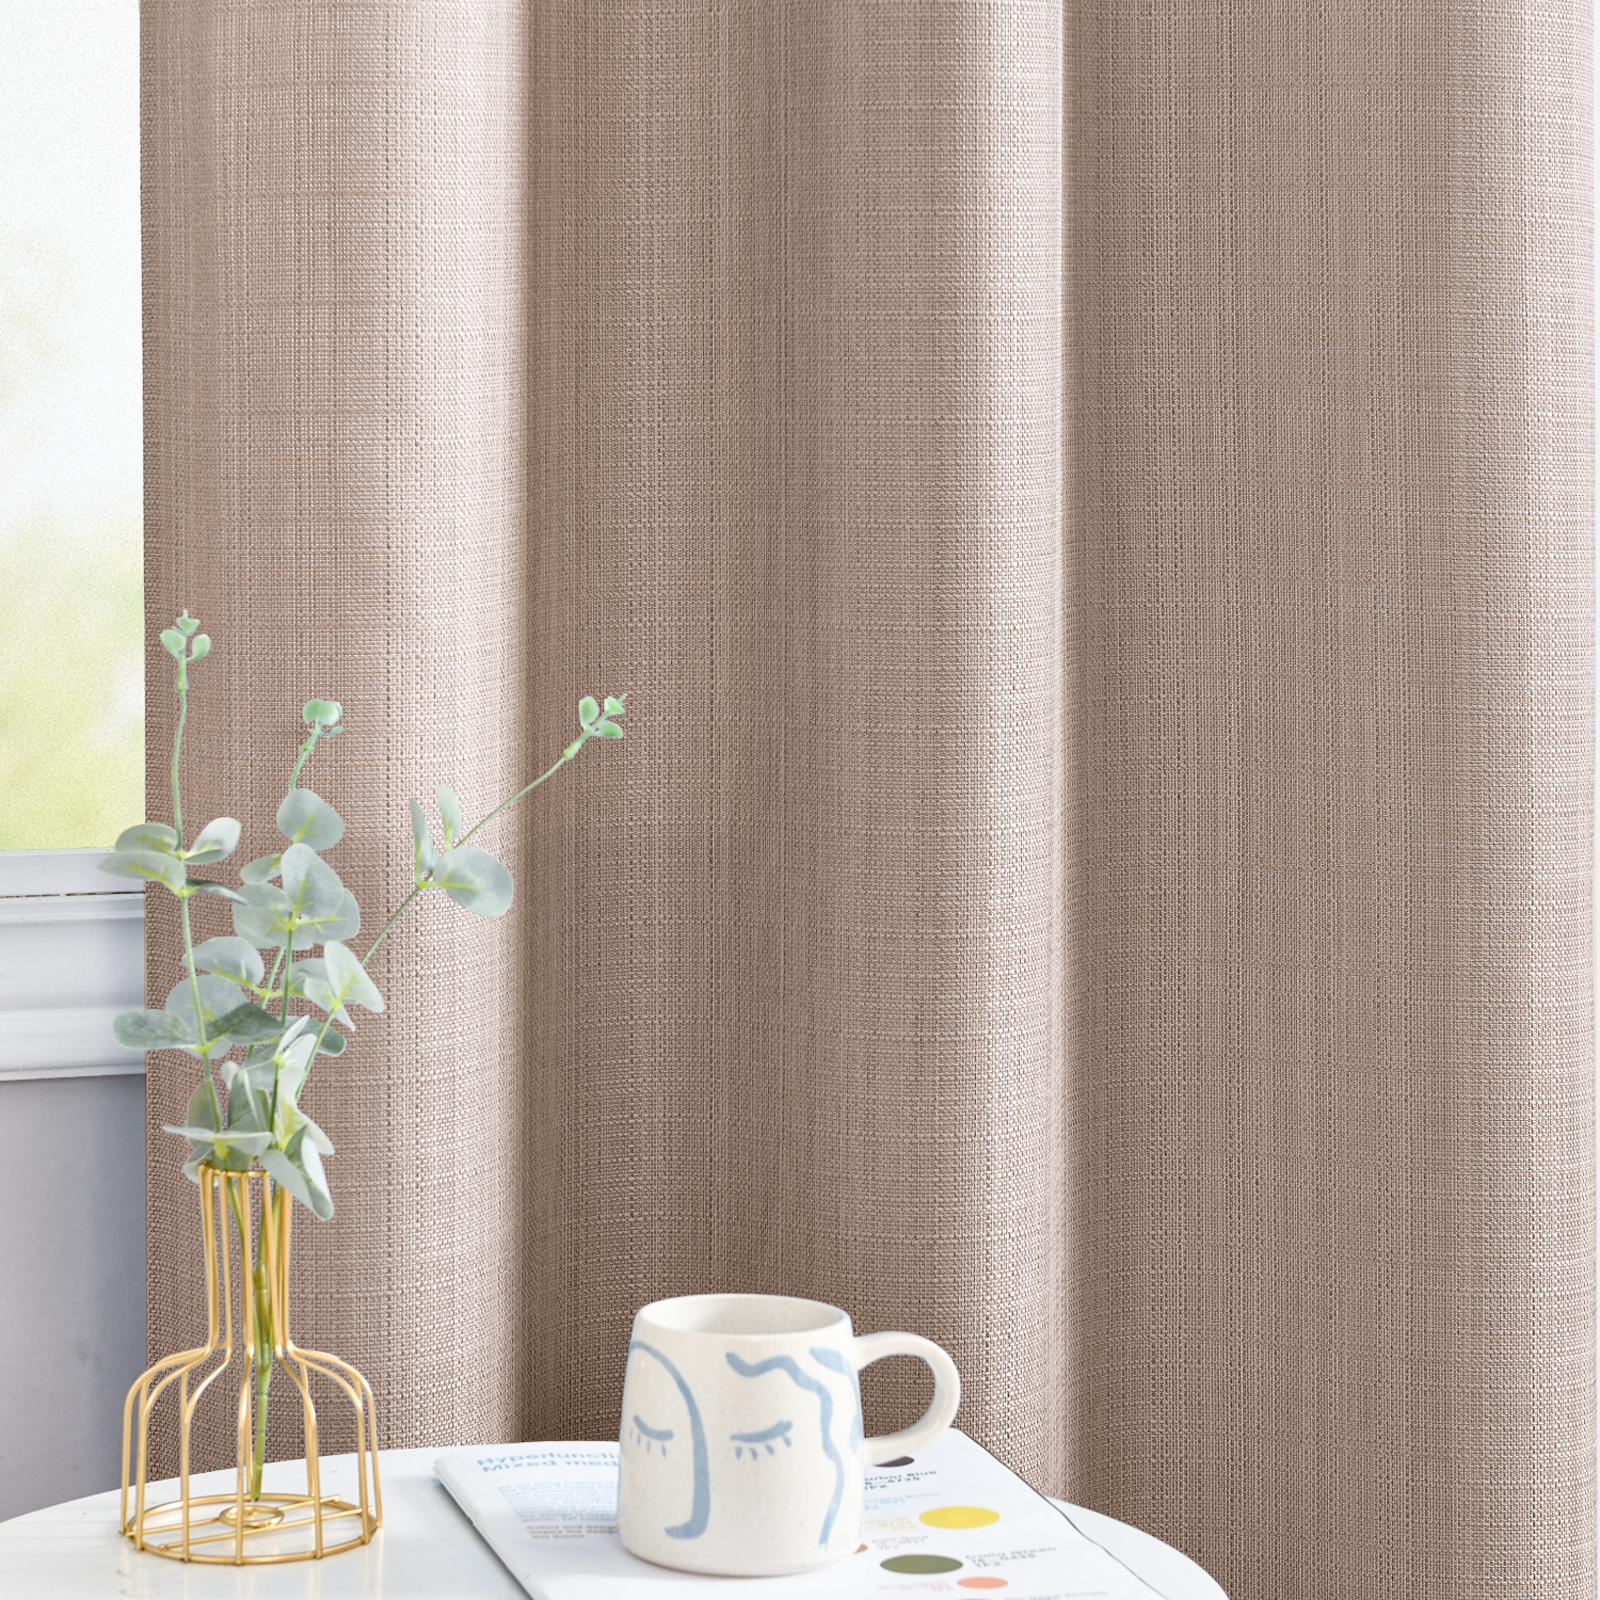 Curtainking Taupe Curtains for Living Room 63 inches Linen Textured Curtains Light Filtering Back Tab Curtains Casual Weave Back Tab Drapes 2 Panels - image 5 of 8